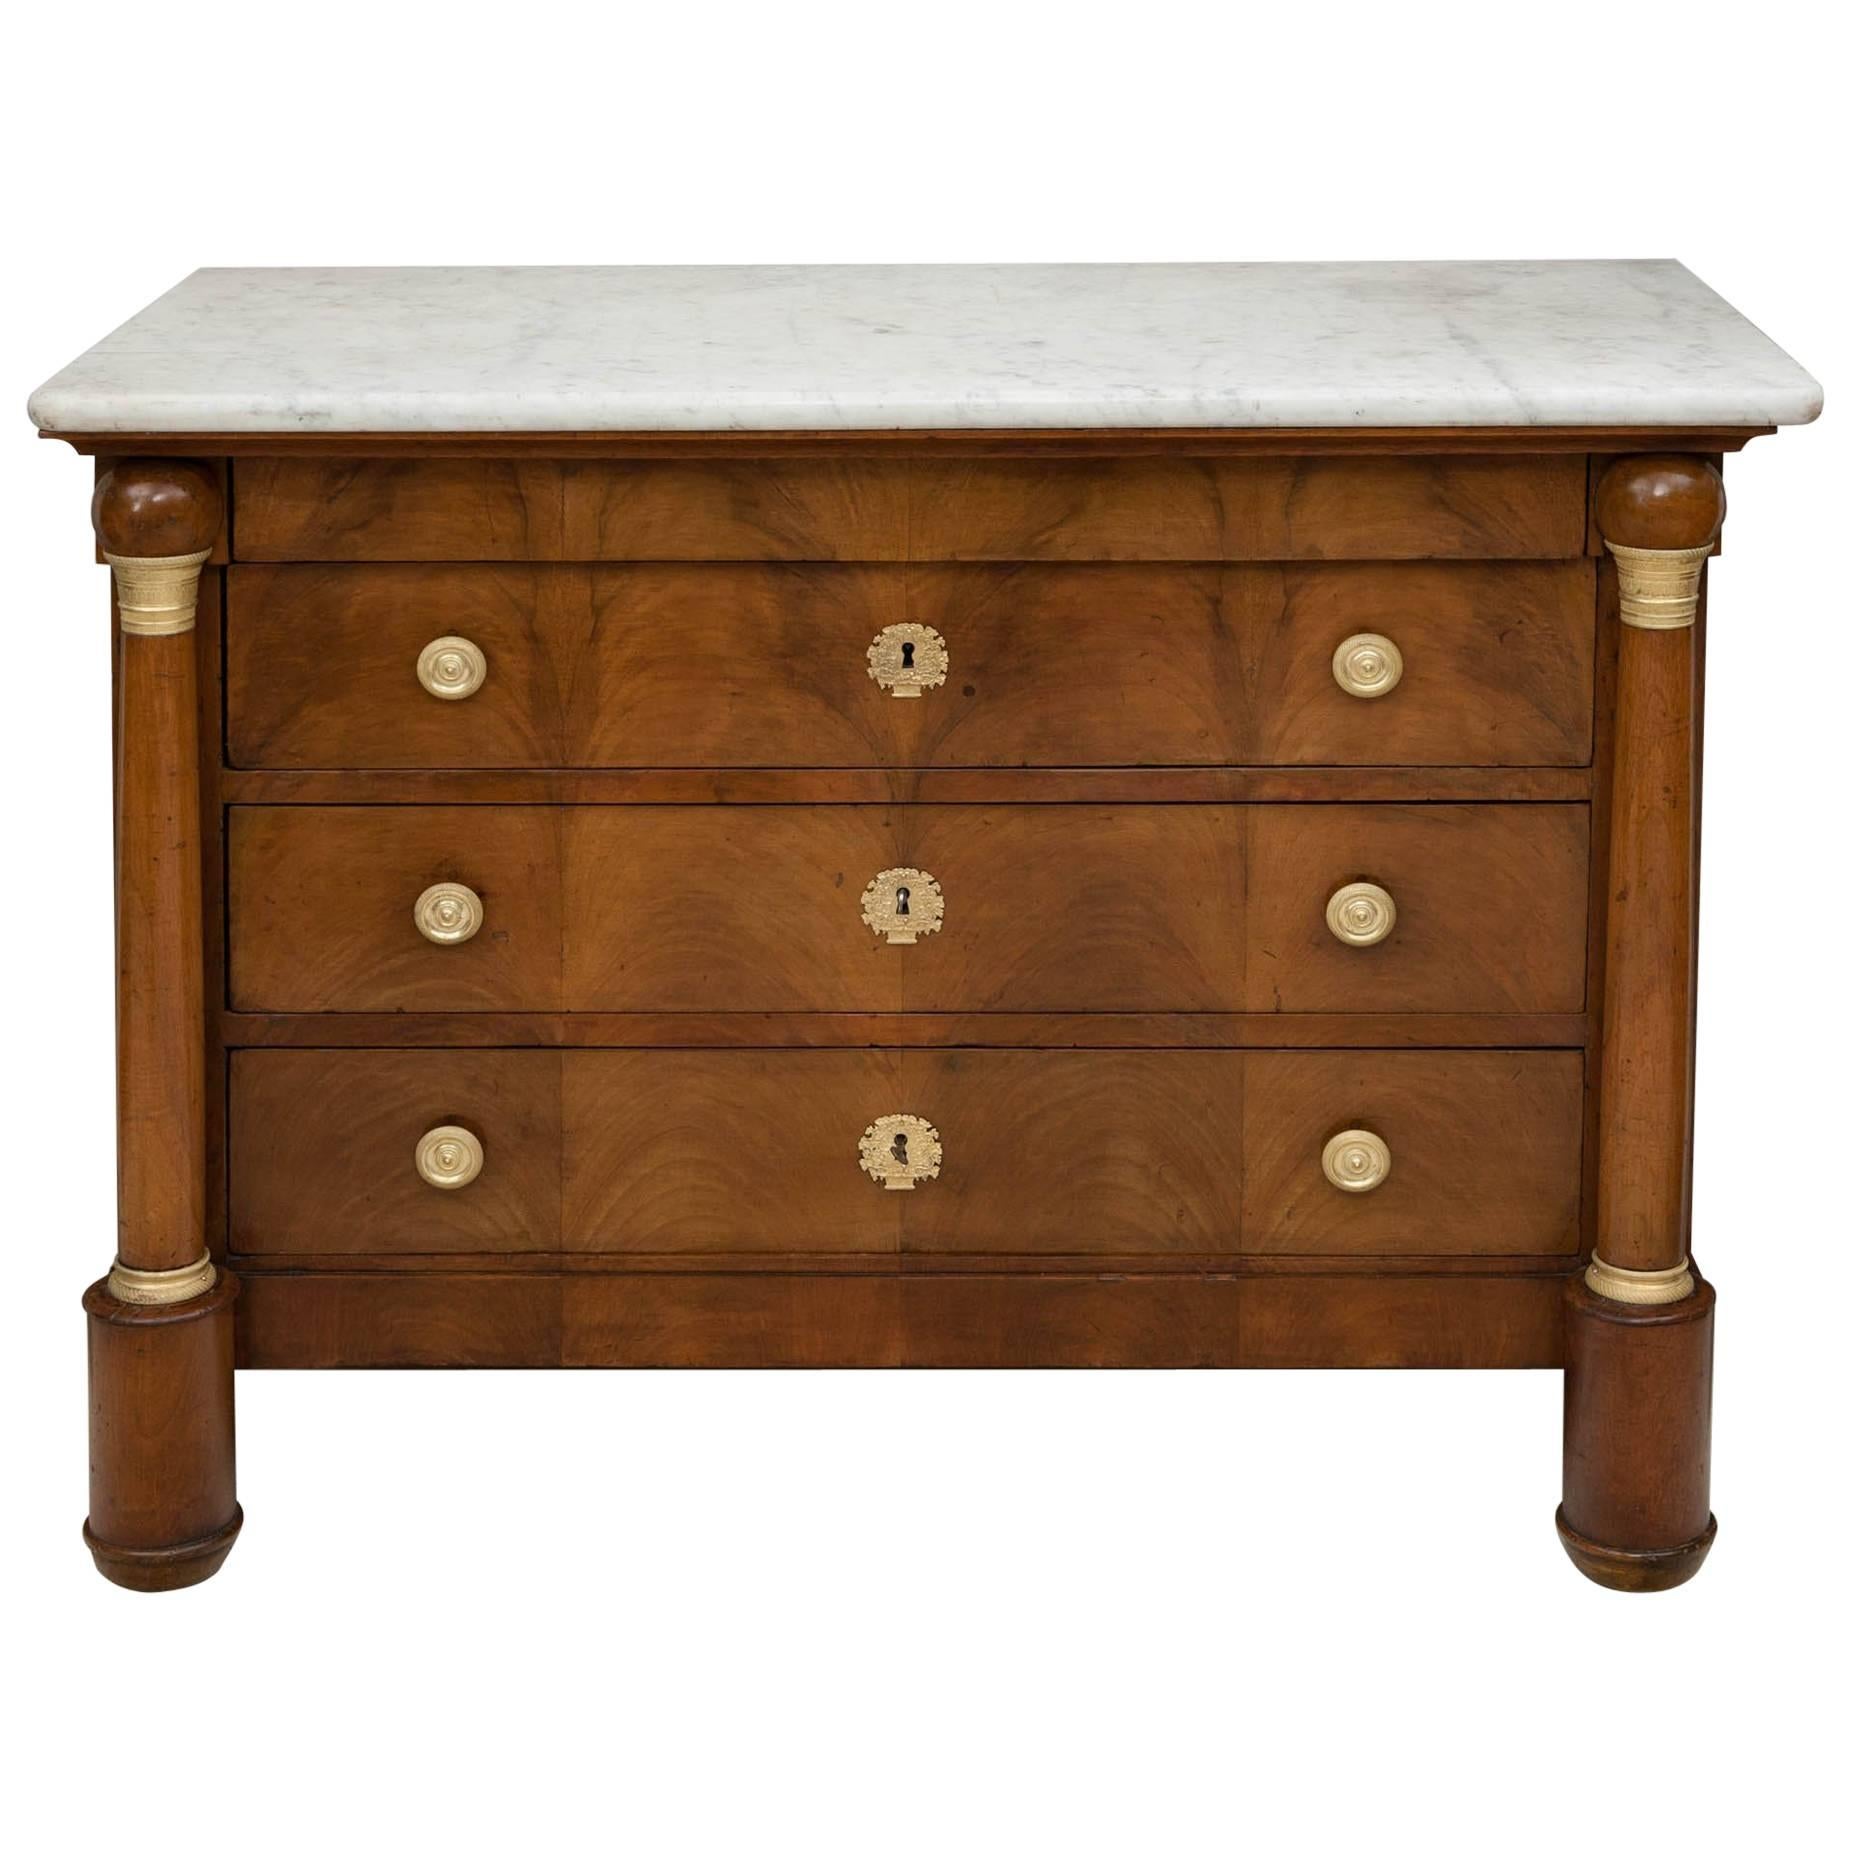 Late French Empire Period Blonde Walnut Commode with White Marble, circa 1815 For Sale